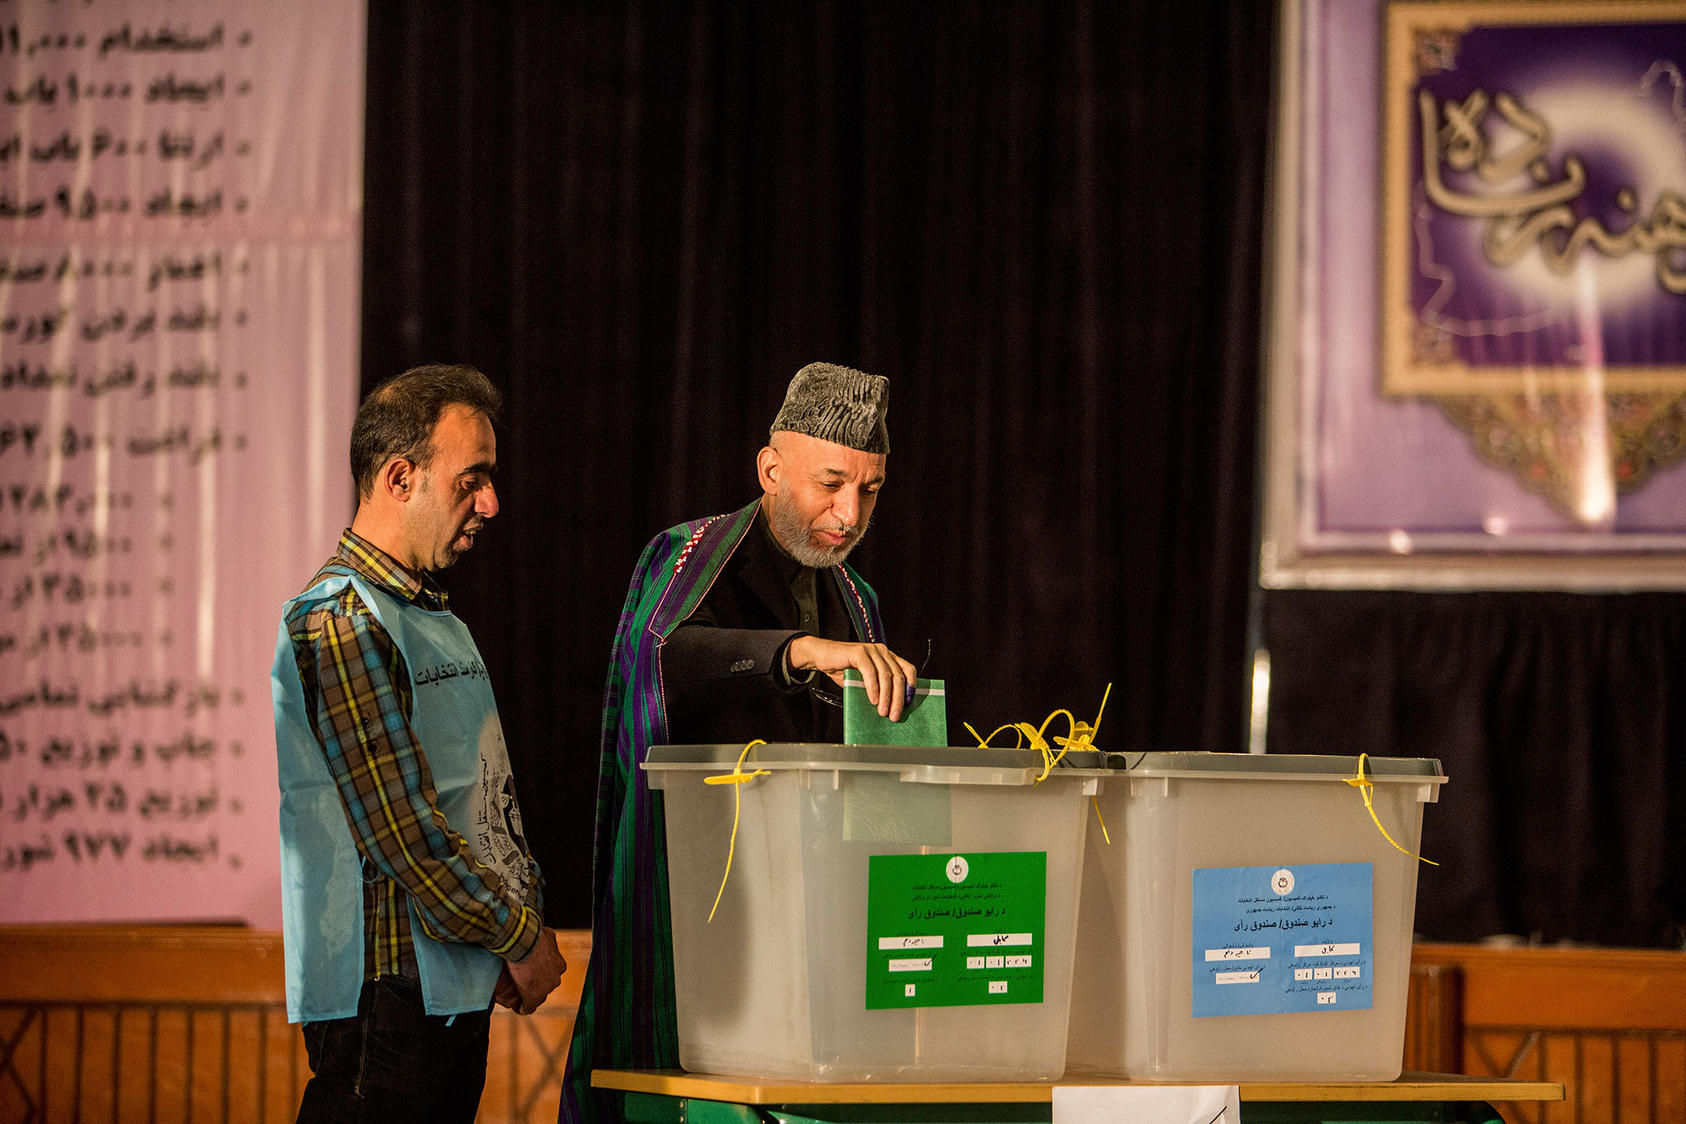 Hamid Karzai, the president of Afghanistan, votes in the election to choose his successor, at a high school in Kabul.